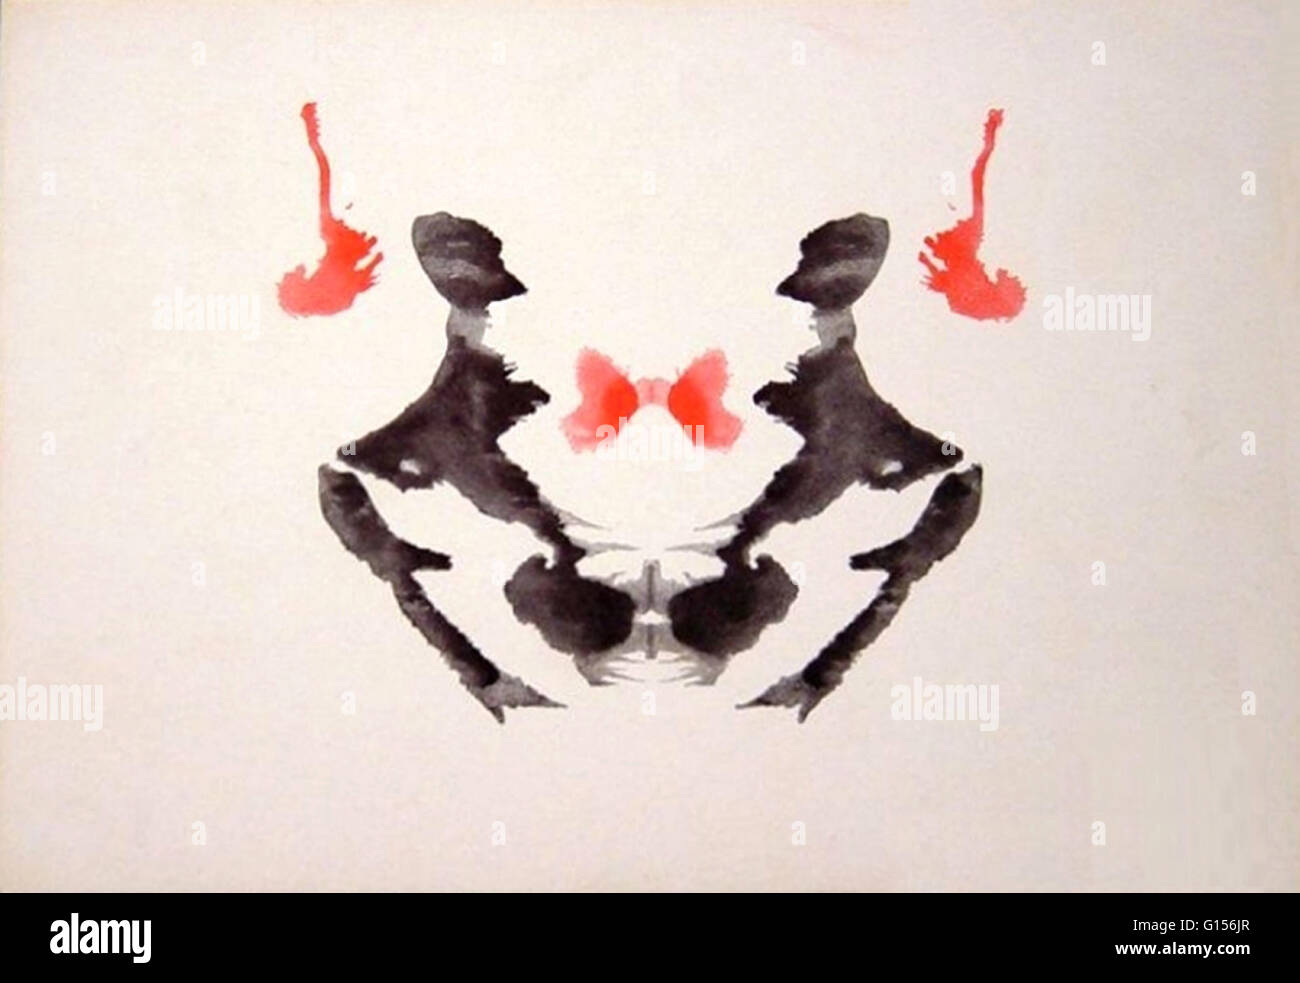 Third card featured in the Rorschach test, a psychological test in which a patient's perceptions of and responses to a series of abstract inkblots are recorded and analyzed by a psychologist. Developed in the 1920s, it is still among the most widely-used Stock Photo